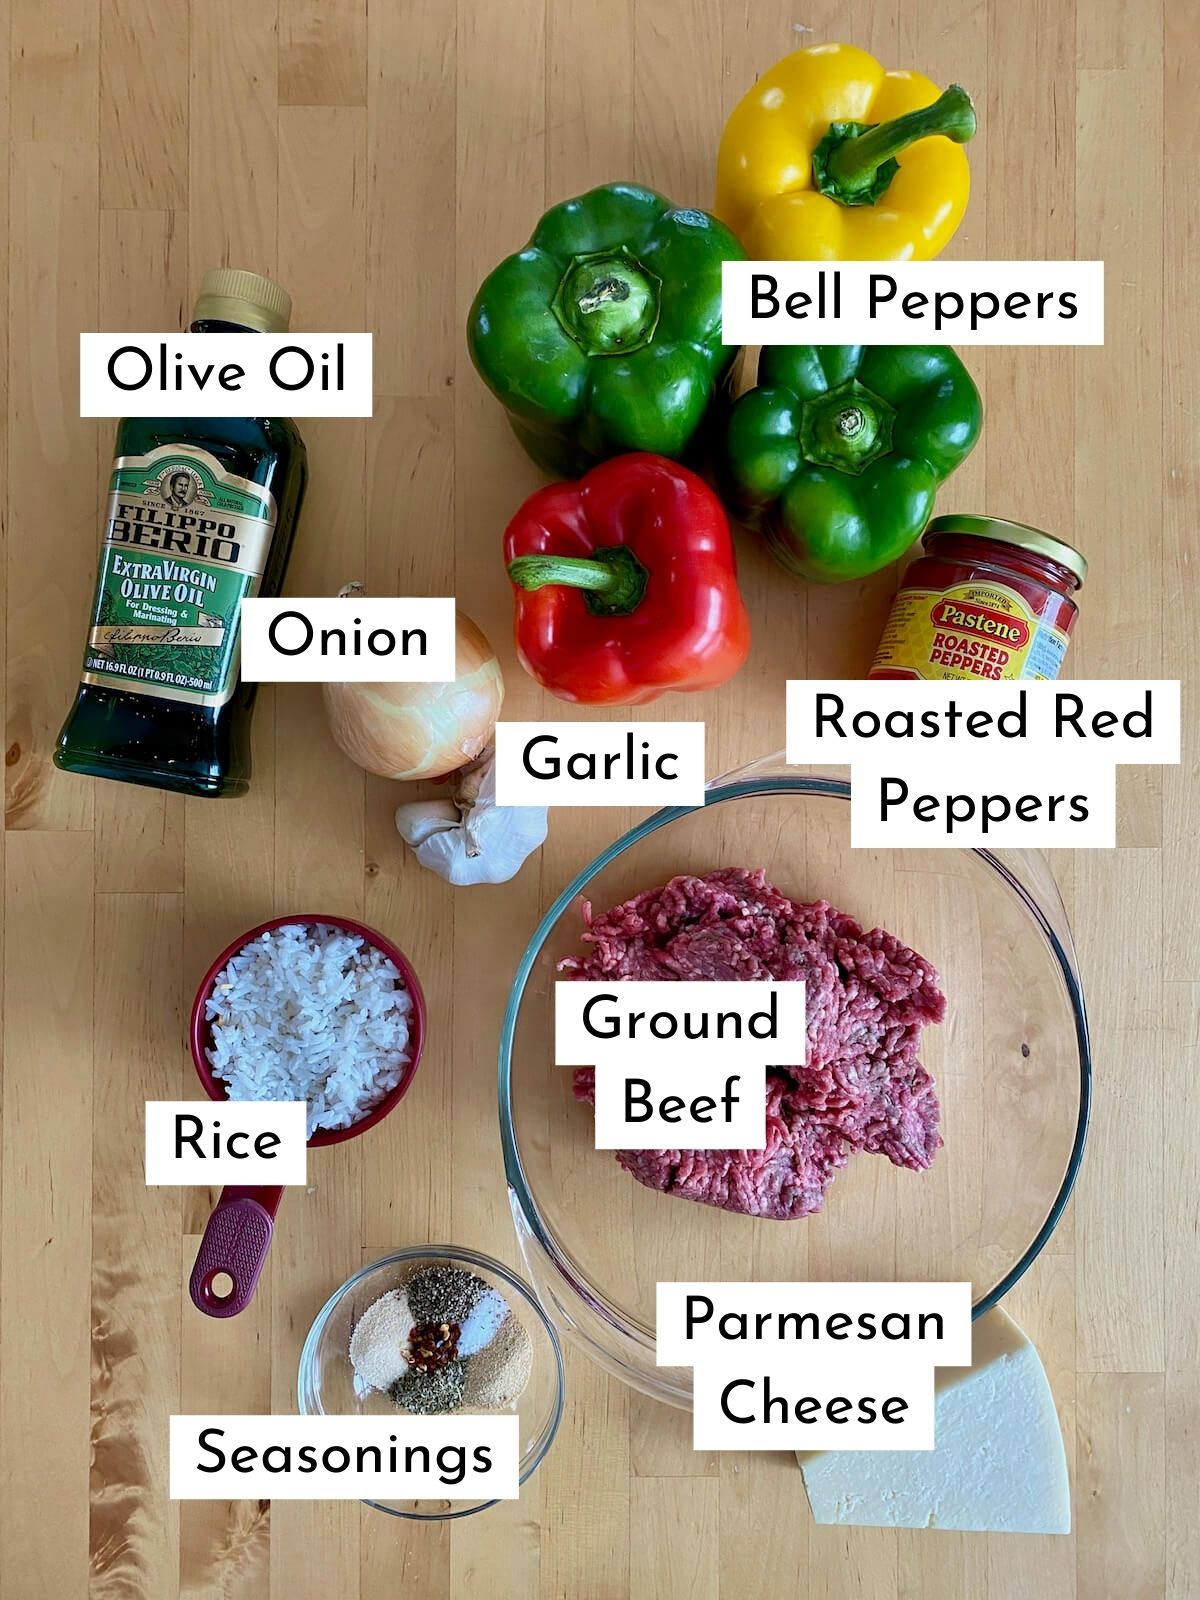 The ingredients to make stuffed peppers without tomato sauce. Each ingredient is labeled with text stating what it is. They include bell peppers, olive oil, onion, garlic, roasted red peppers, ground beef, rice, seasonings, and parmesan cheese.